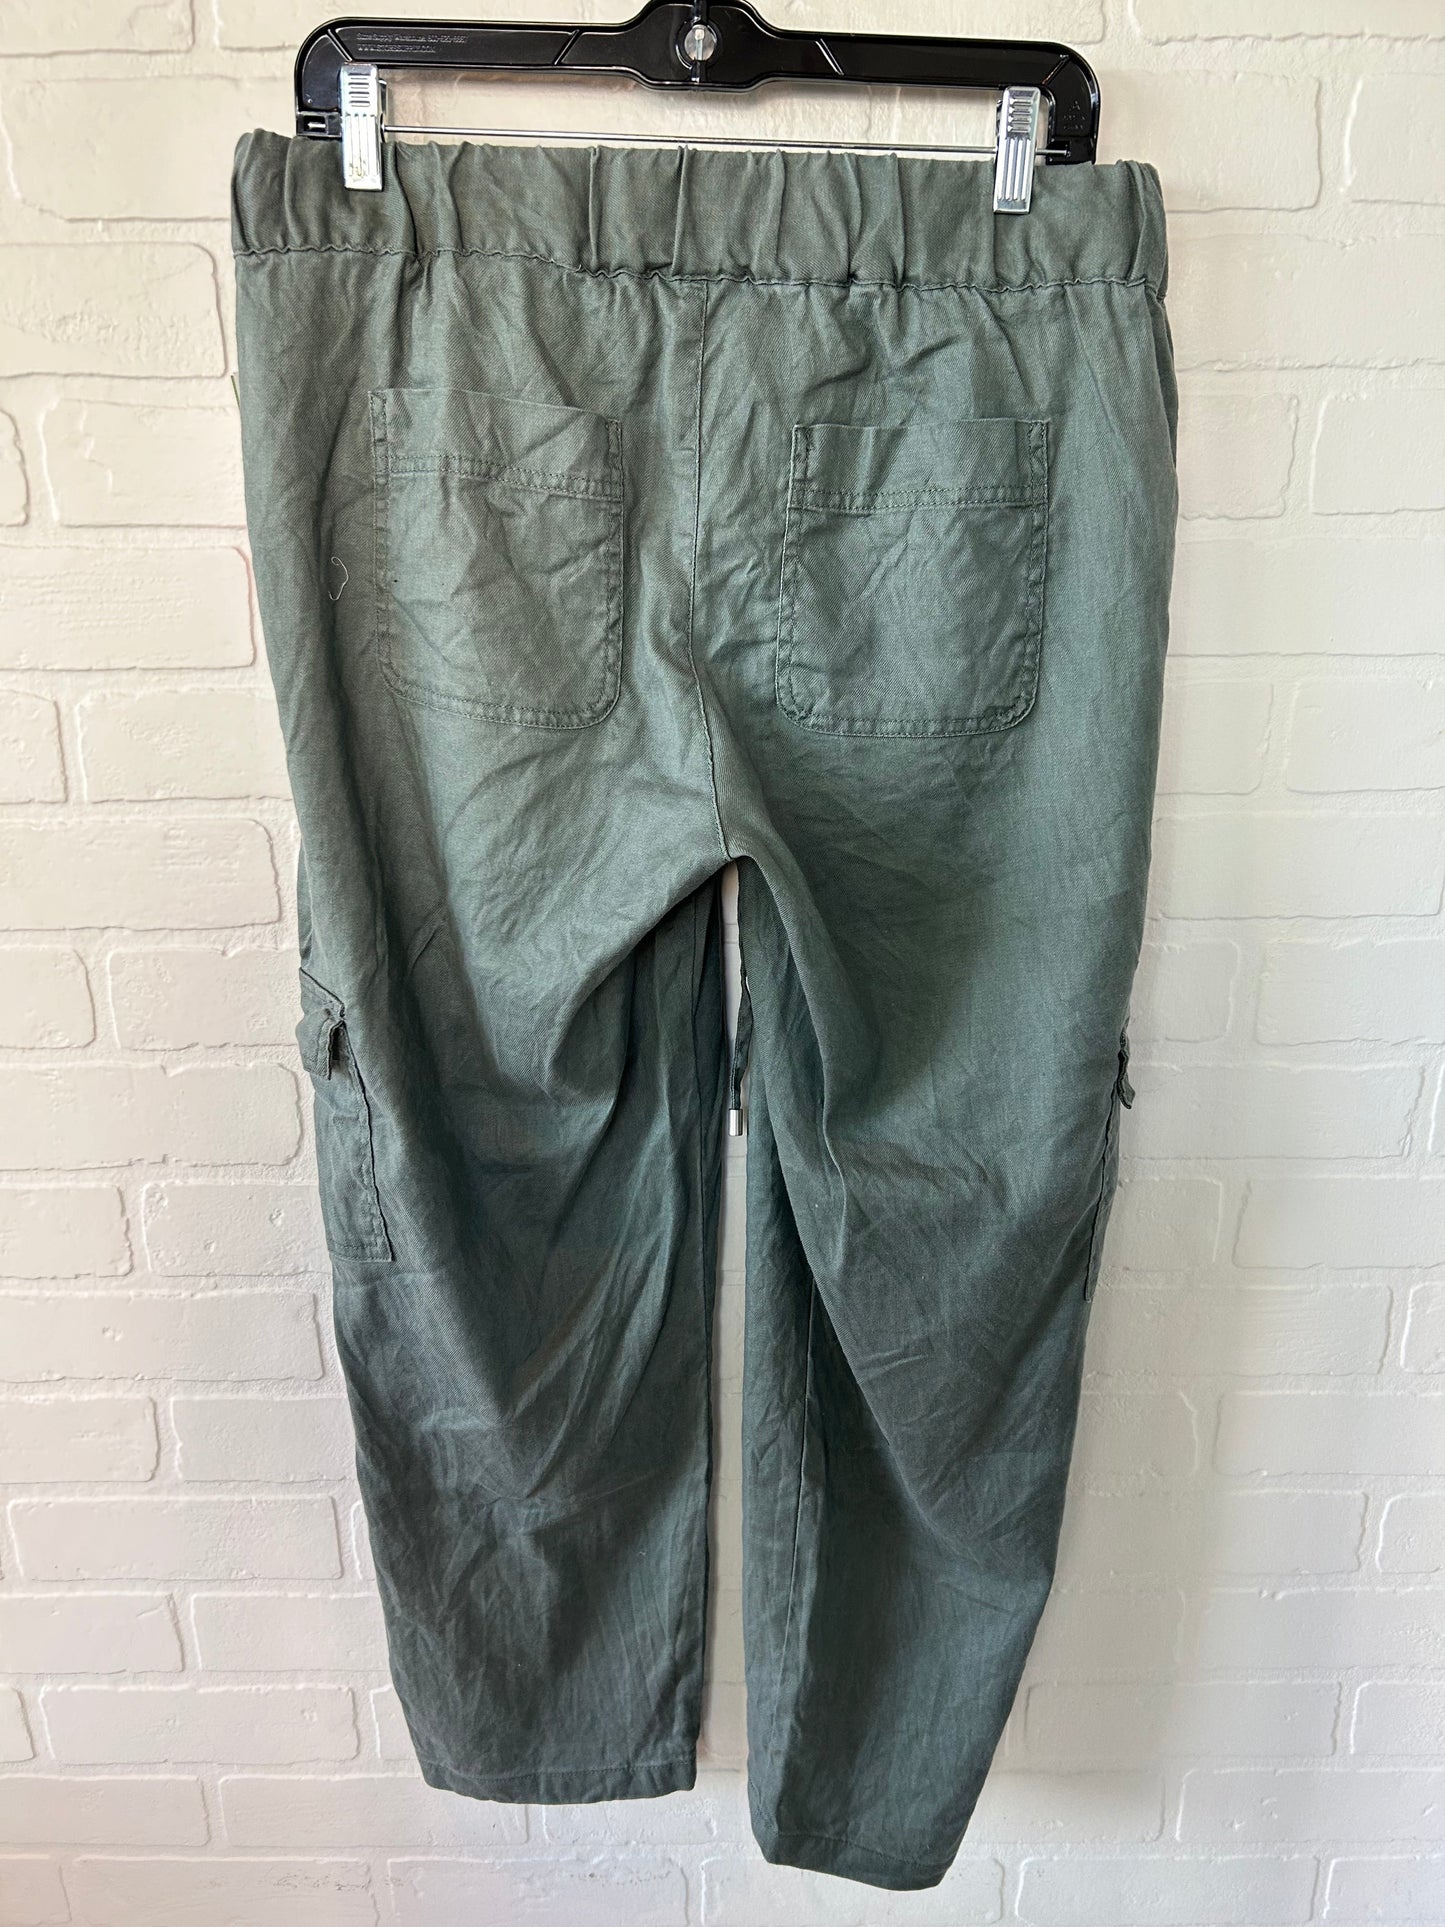 Pants Cargo & Utility By Liverpool  Size: 6